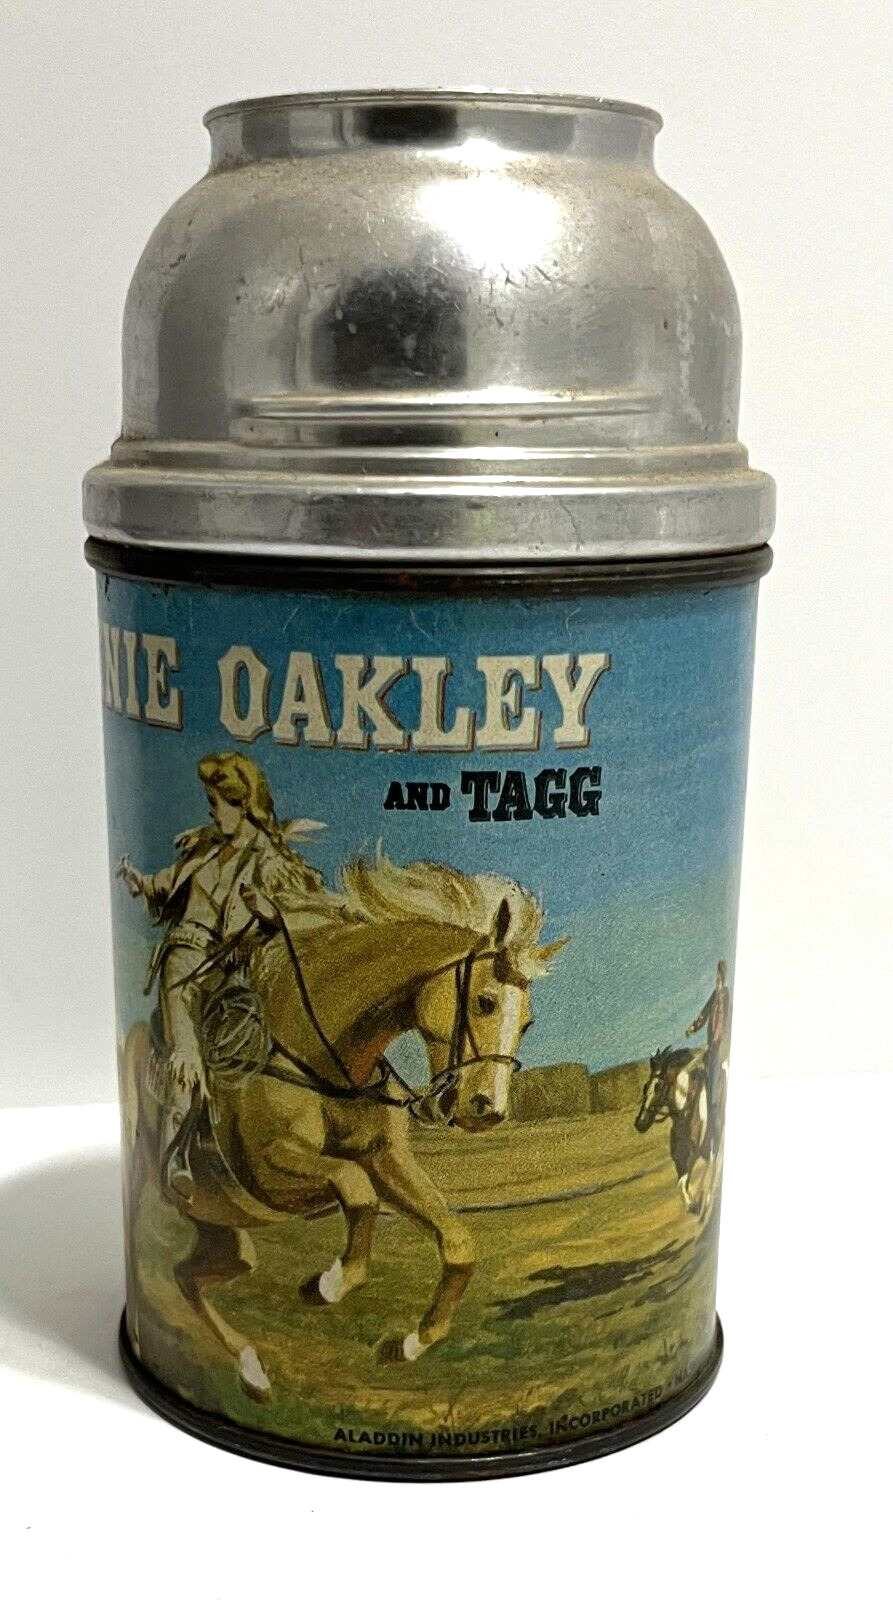 ANNIE OAKLEY & Tagg Vintage 1950's Aladdin Metal Thermos Only {No Cup & Stopper}